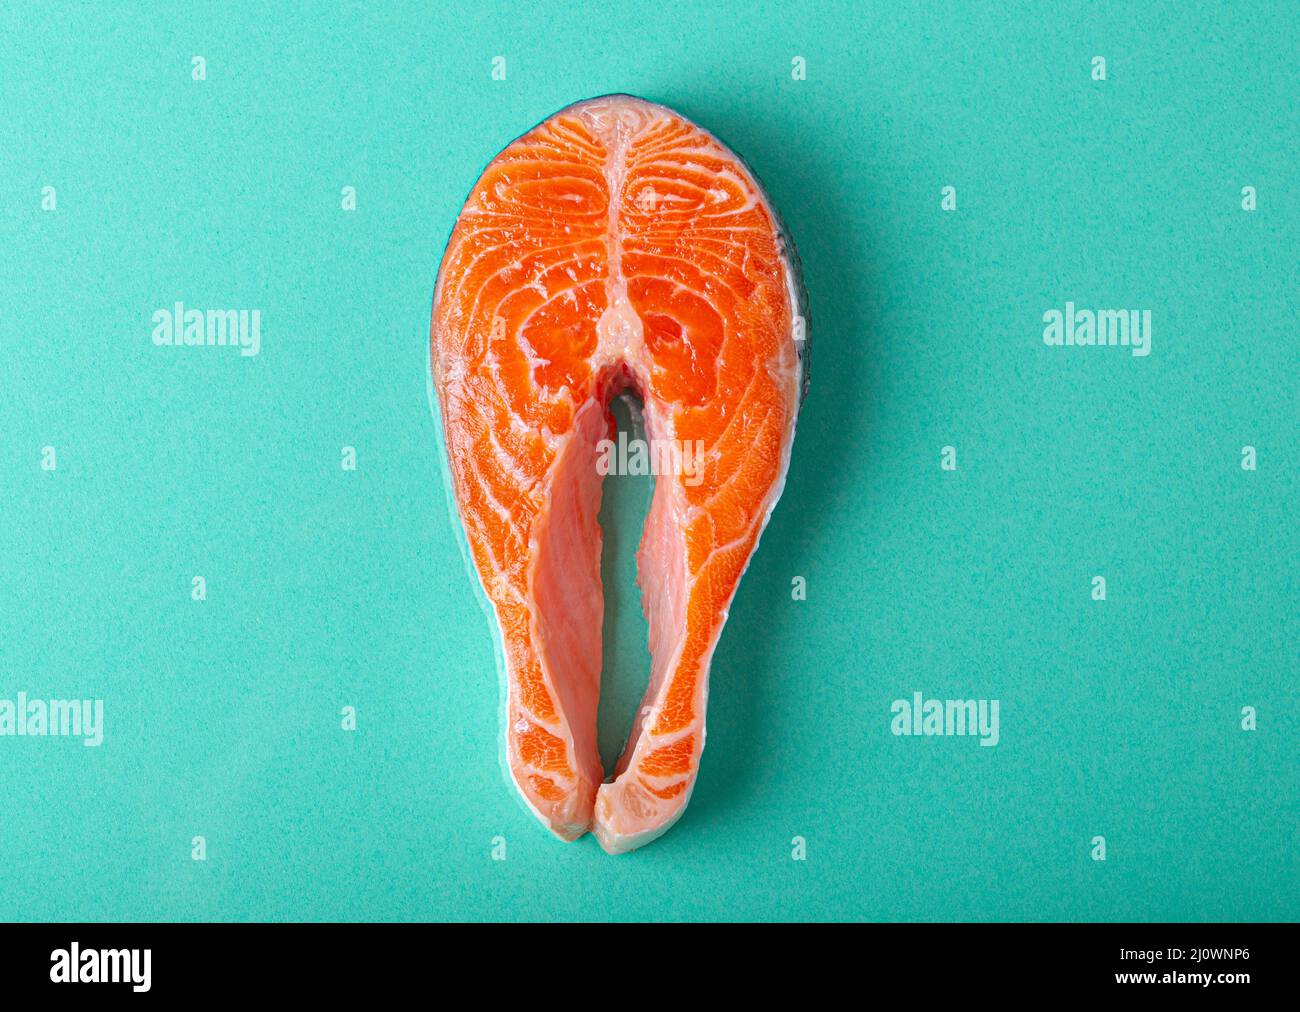 Raw fresh fish salmon steak top view on blue clean background from above Stock Photo